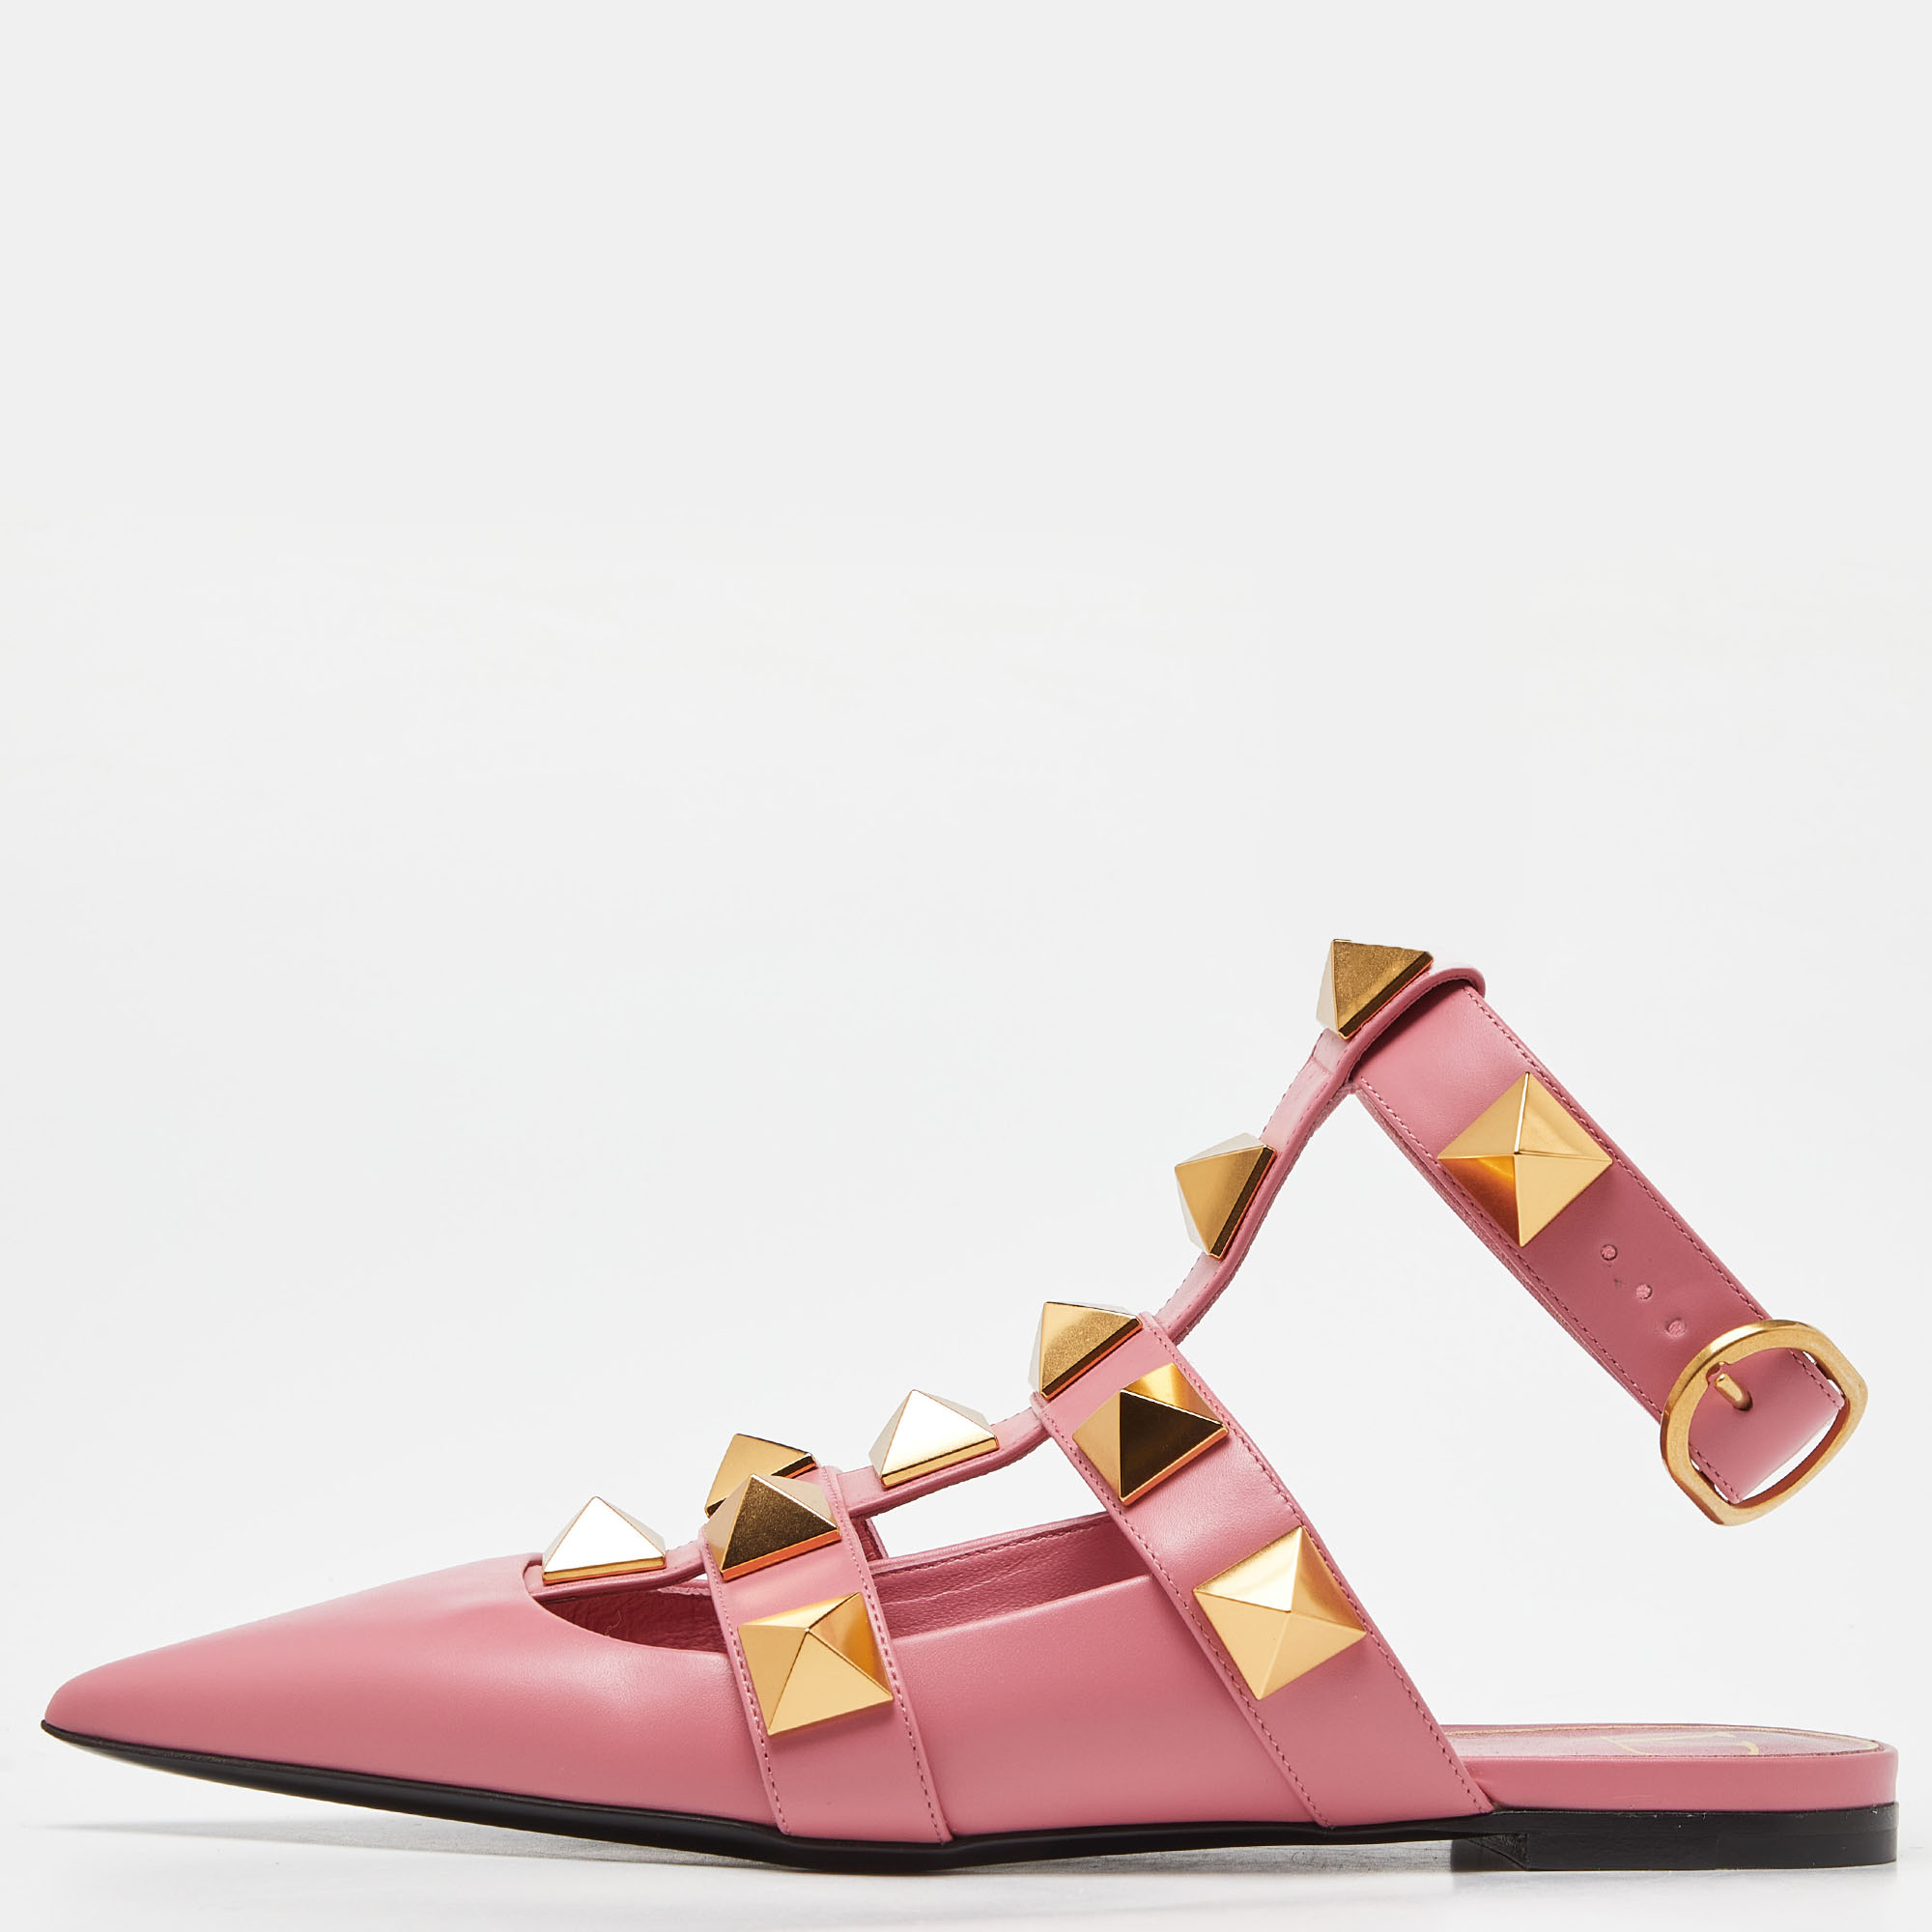 Valentino pink leather roman stud ankle cuff flat sandals size 37